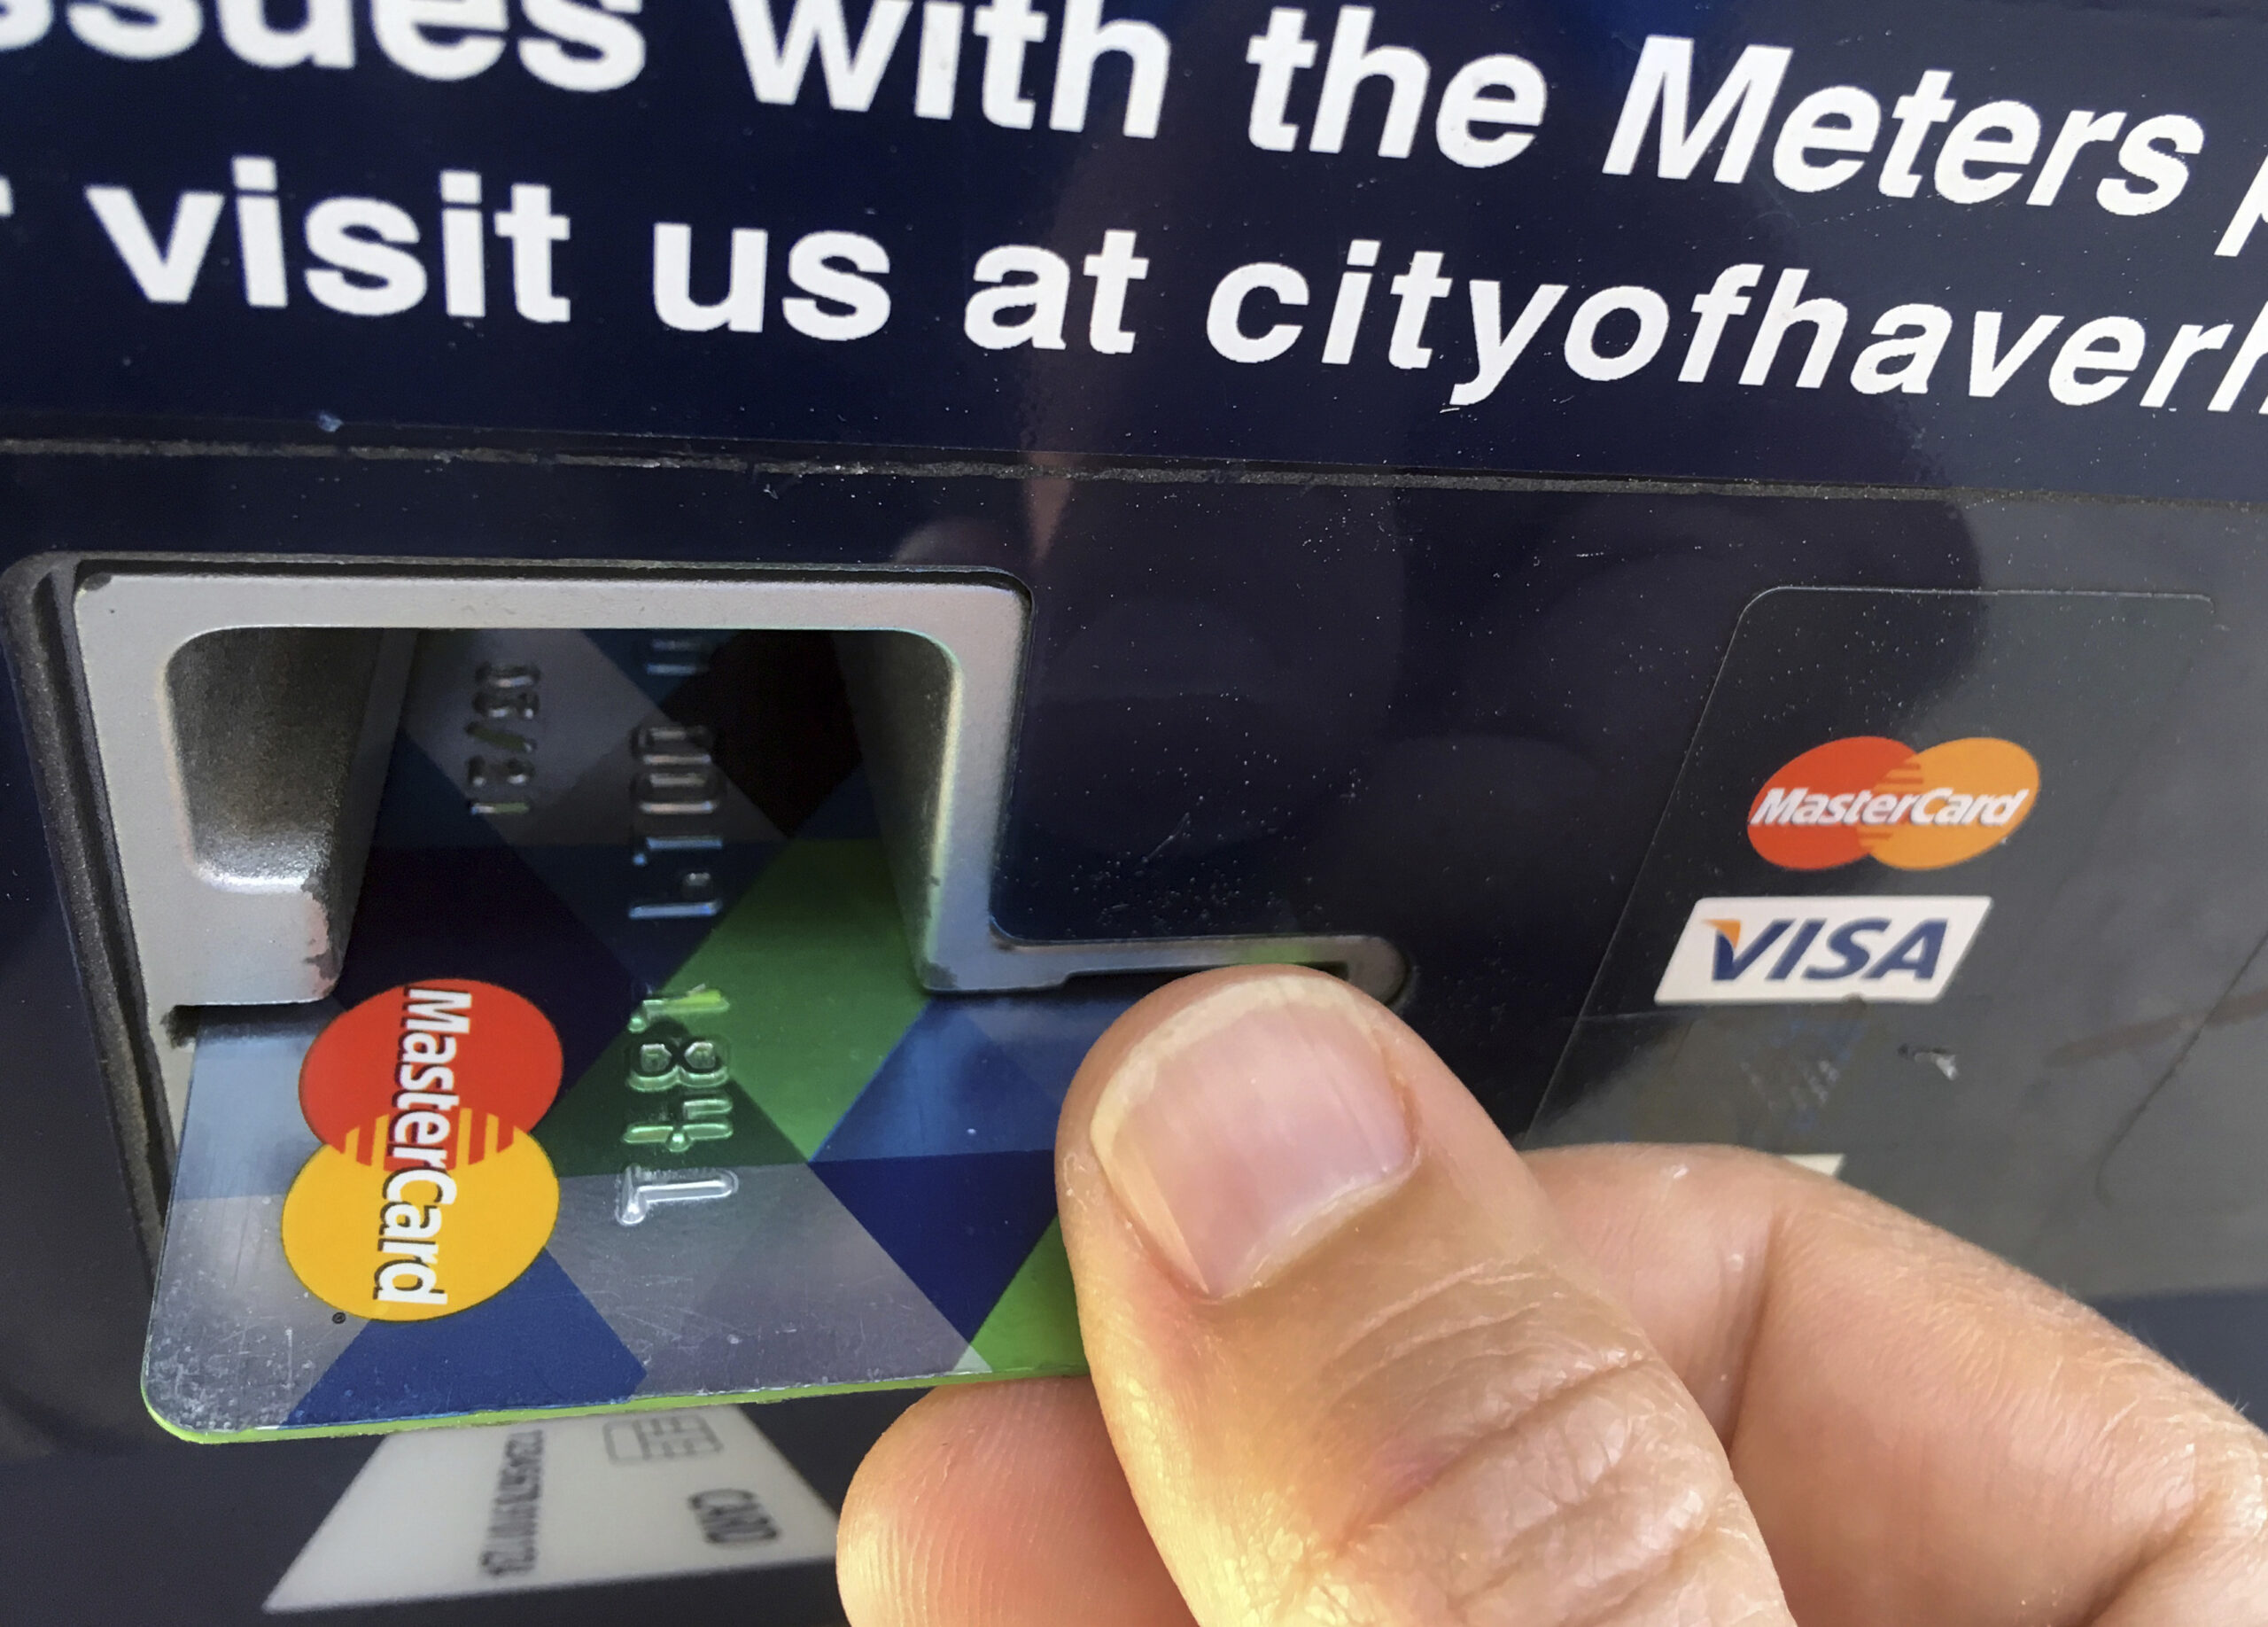 Credit card inserted into parking meter